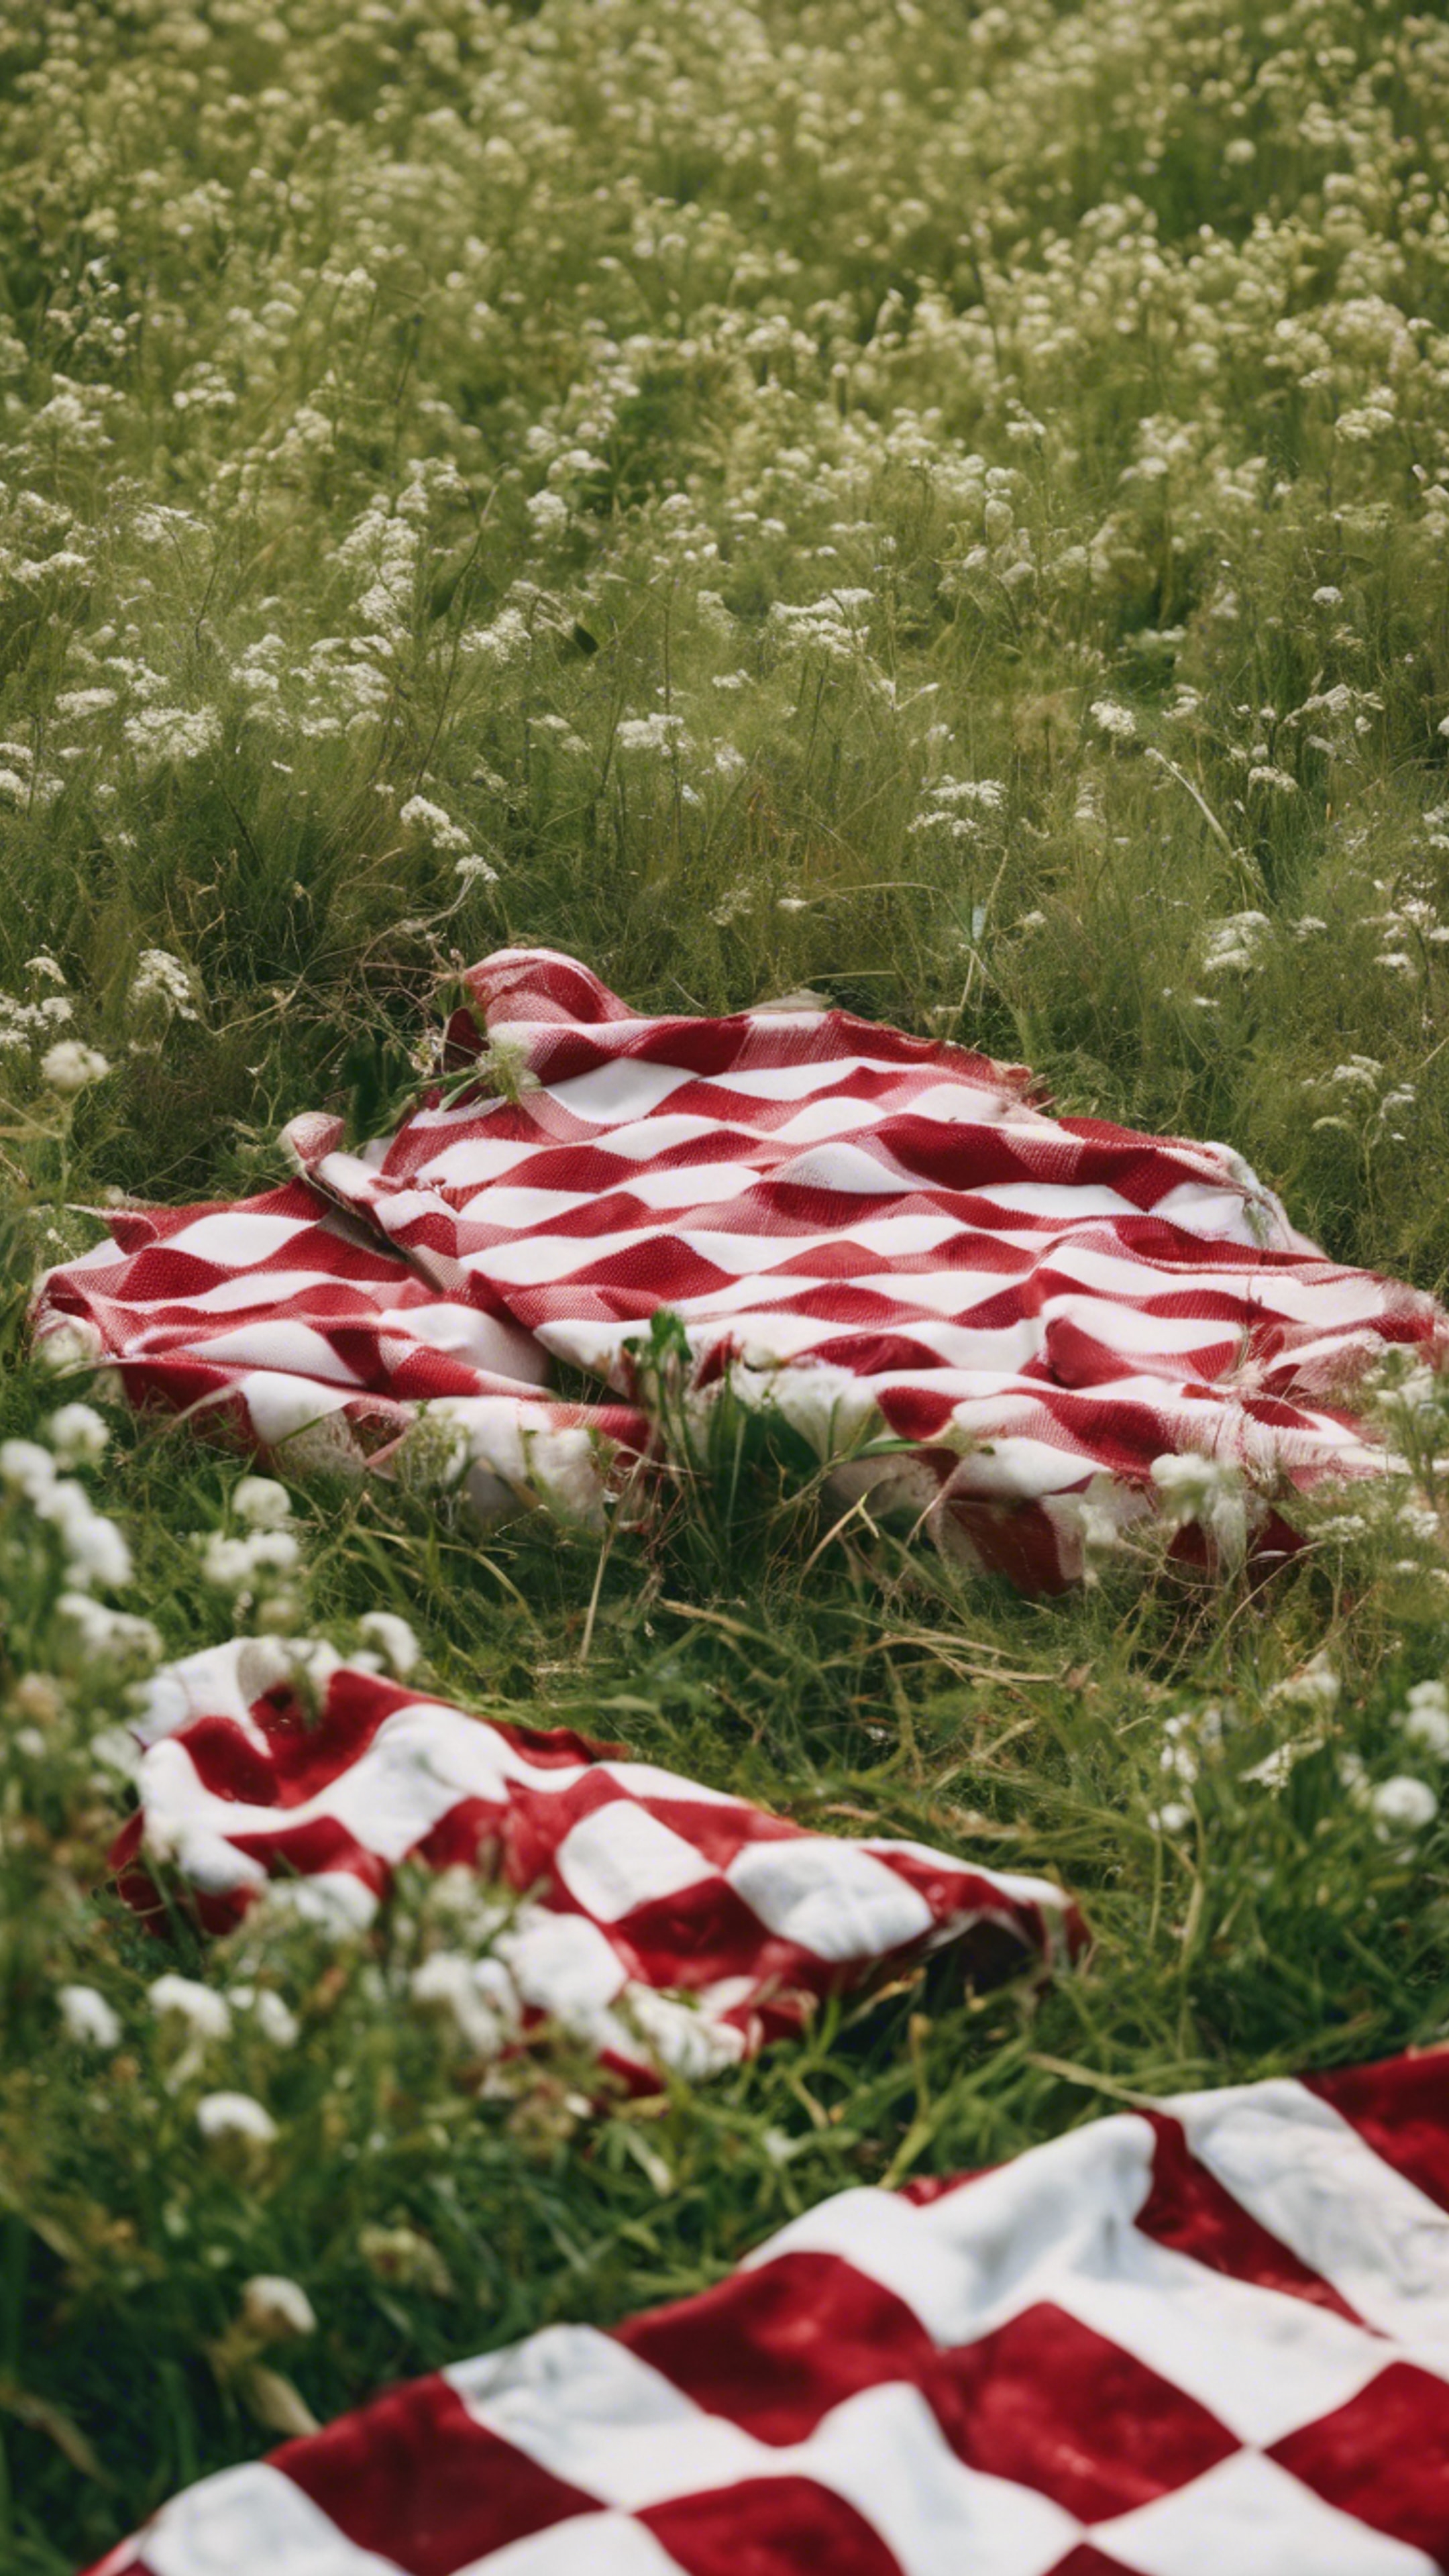 A red and white checkered picnic blanket spread out in a lush green field. Tapeta na zeď[d3f97e971ed8445aa31d]